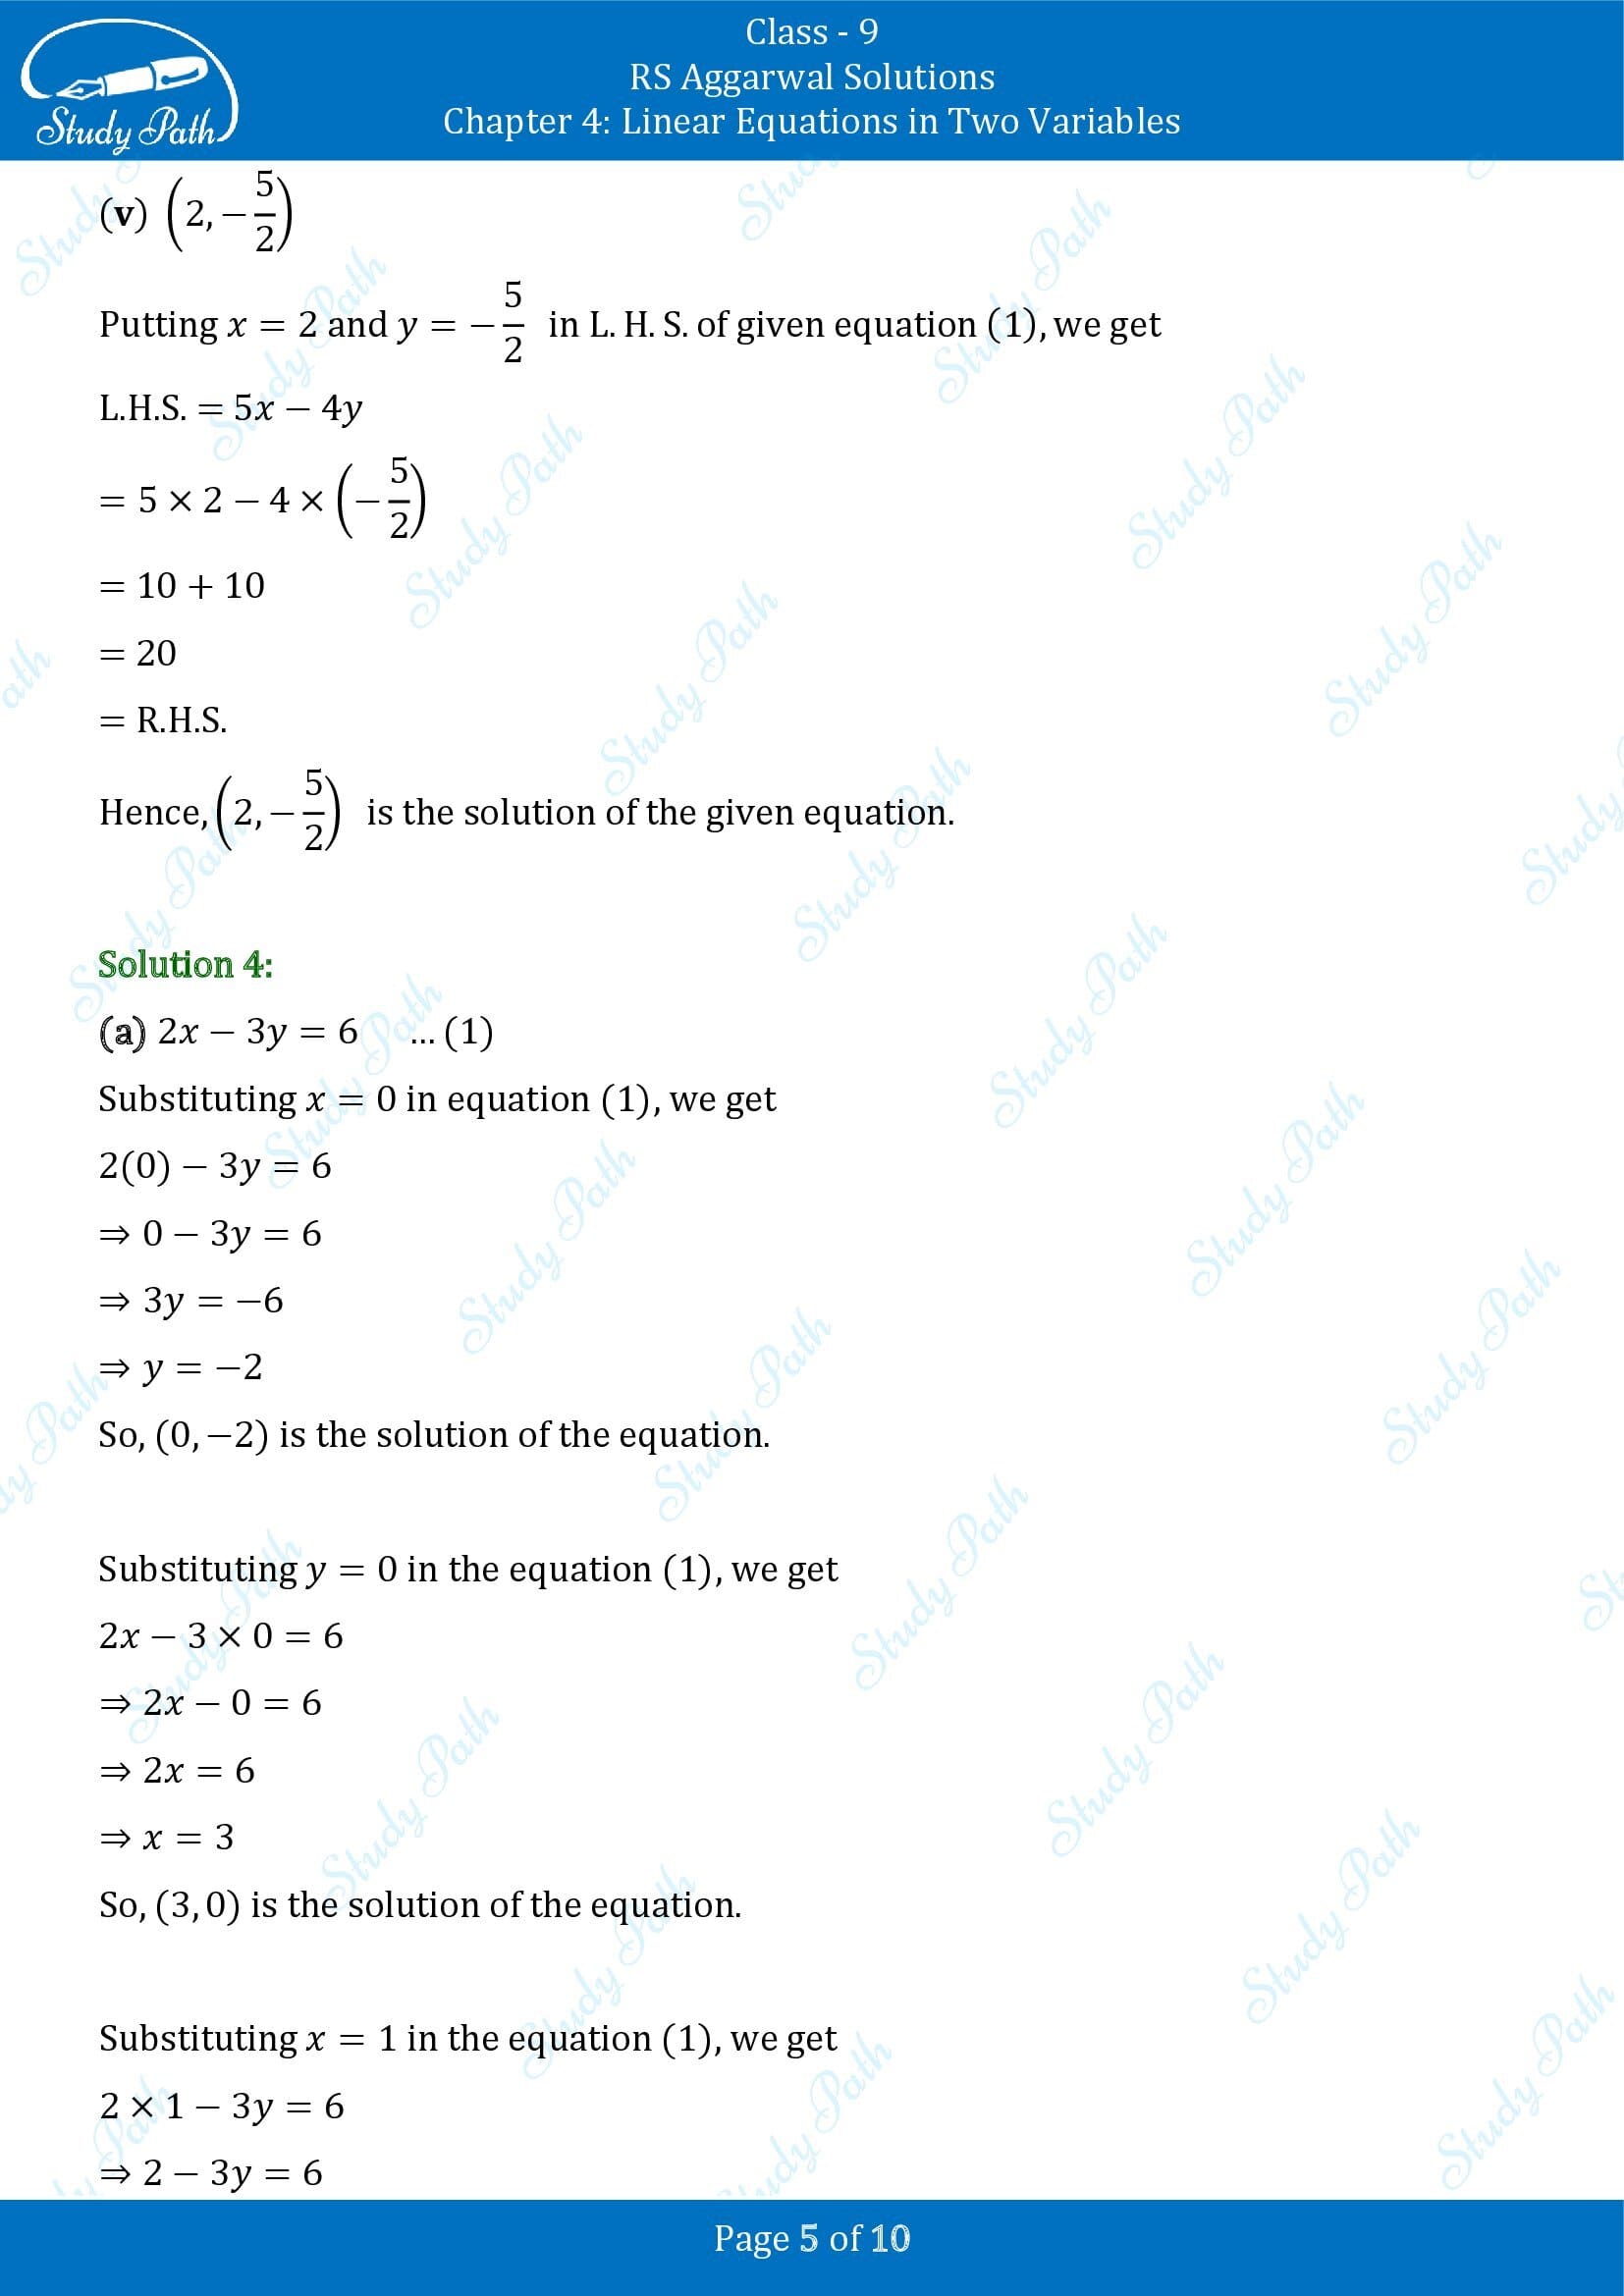 RS Aggarwal Solutions Class 9 Chapter 4 Linear Equations in Two Variables Exercise 4A 0005